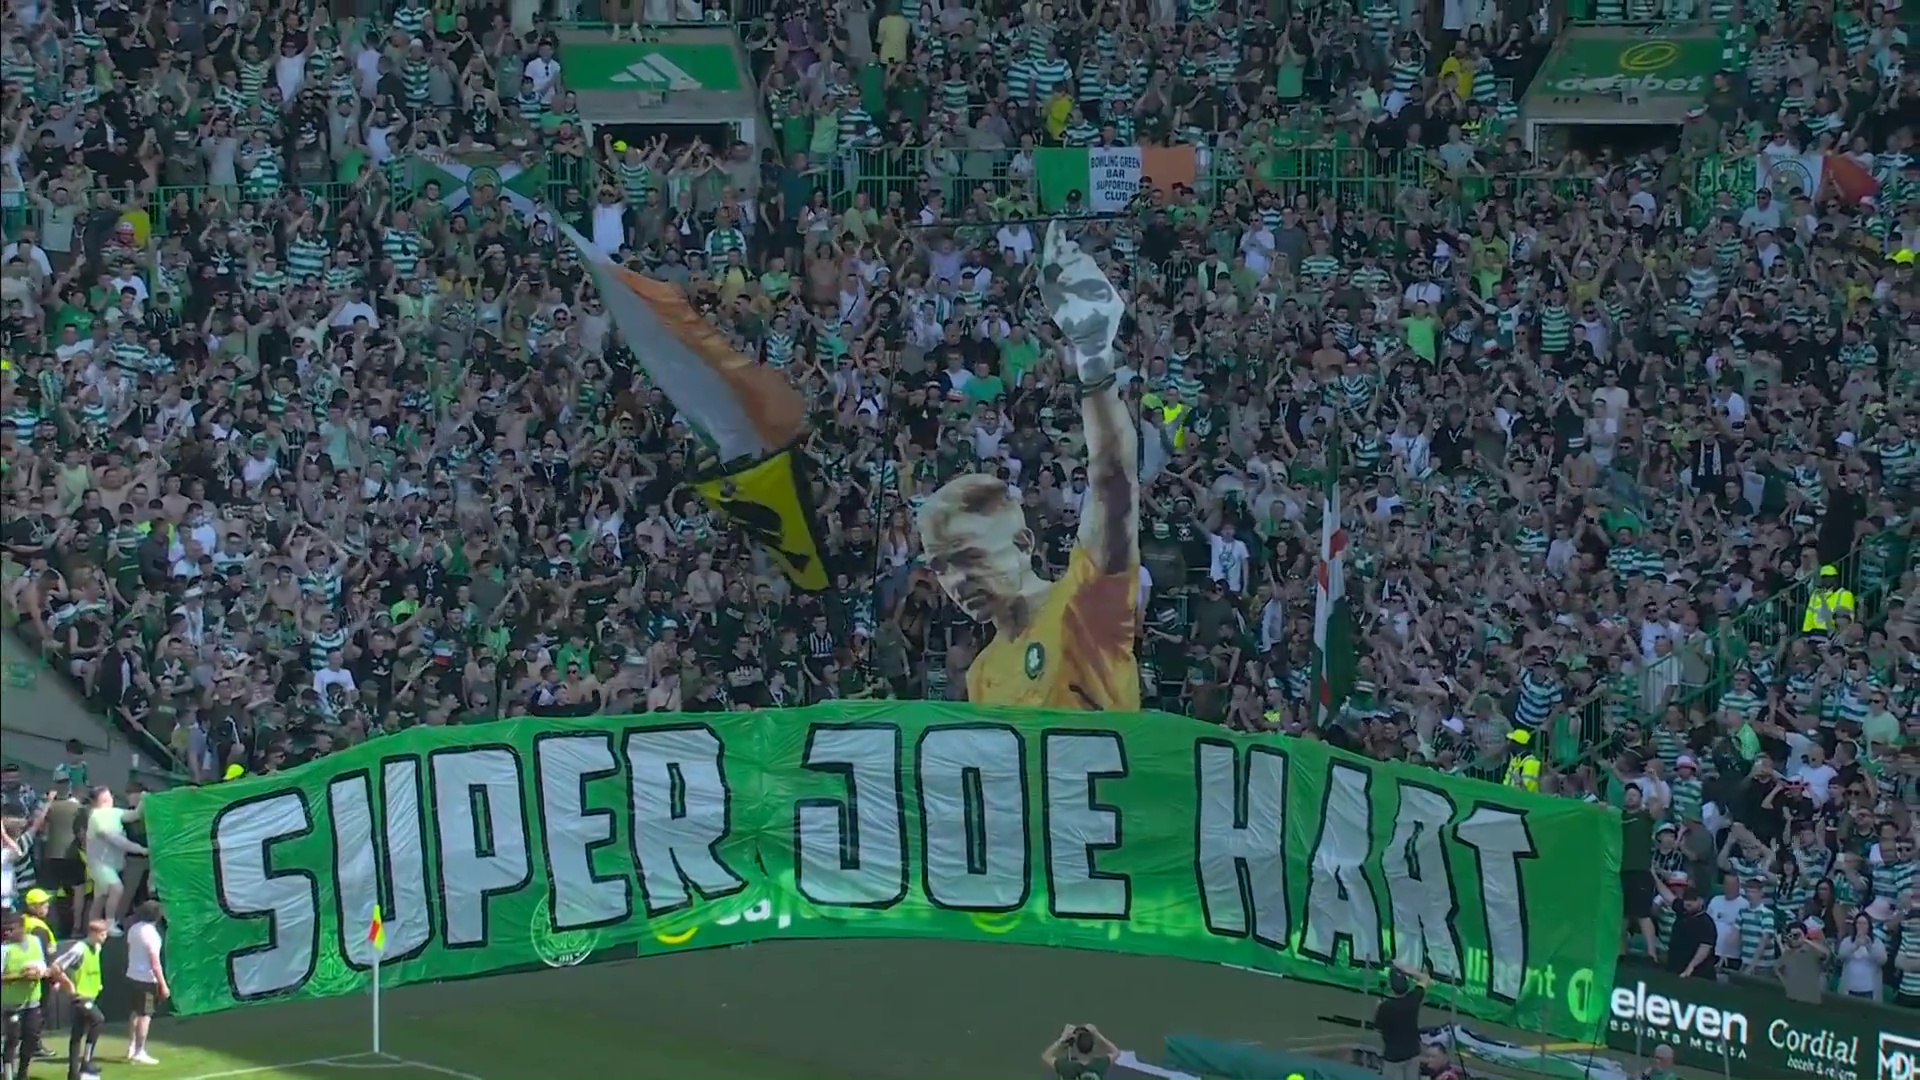 The supporters held up a tifo display for the goalkeeper